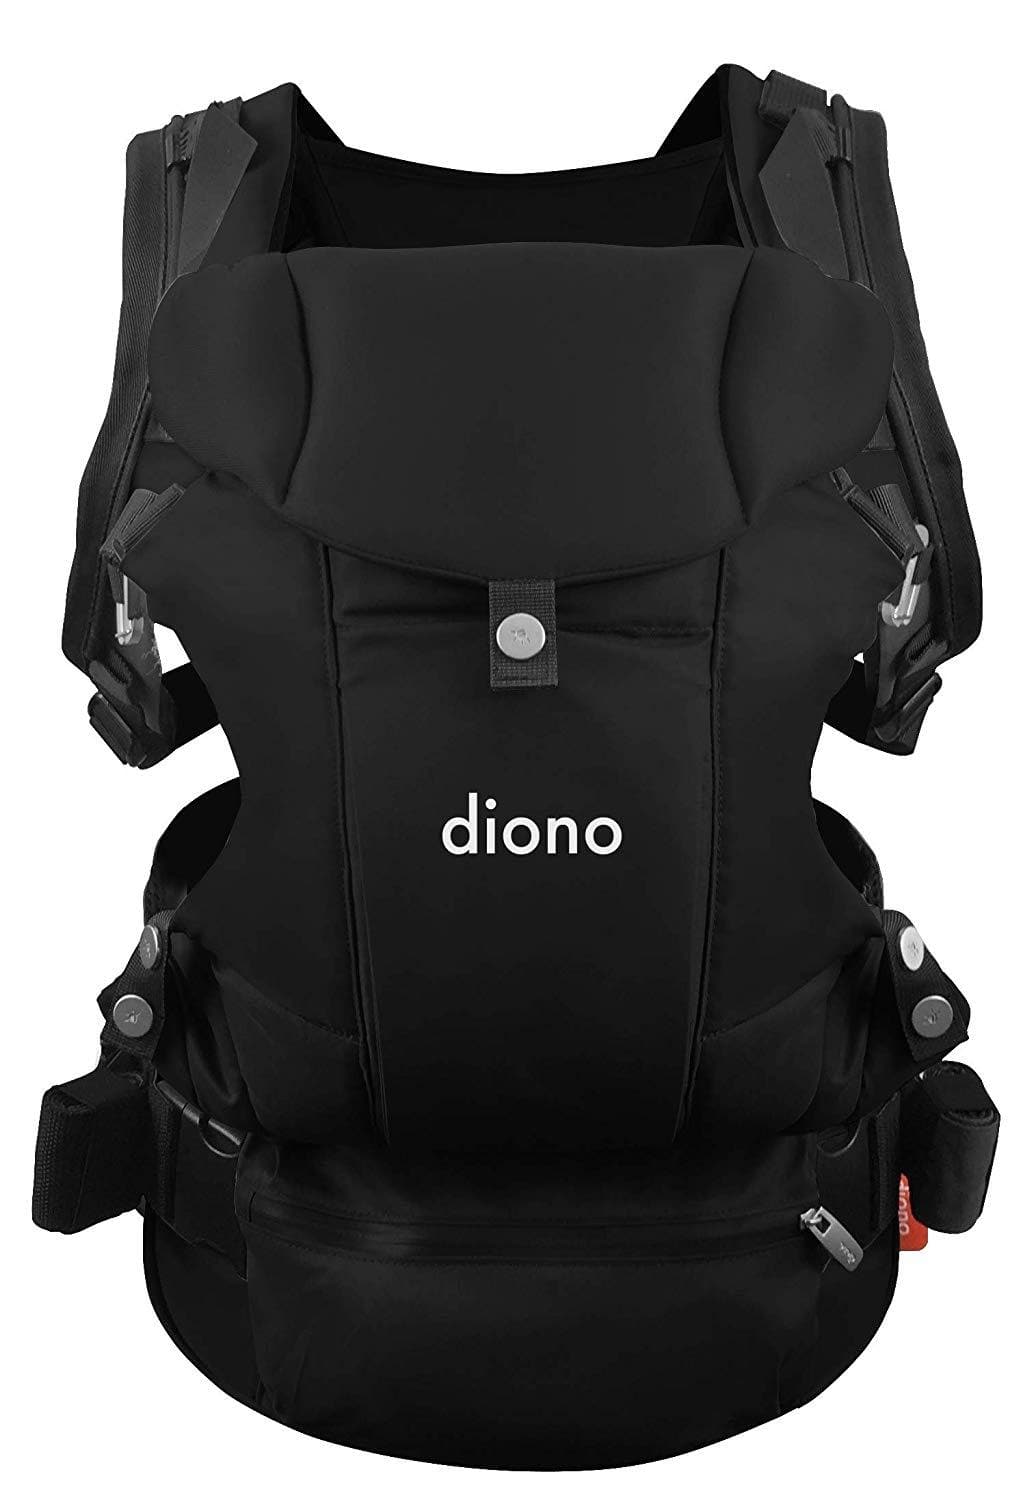 DIONO Carus Complete 4-in-1 Carrying System with Detachable Backpack - ANB Baby -$100 - $300